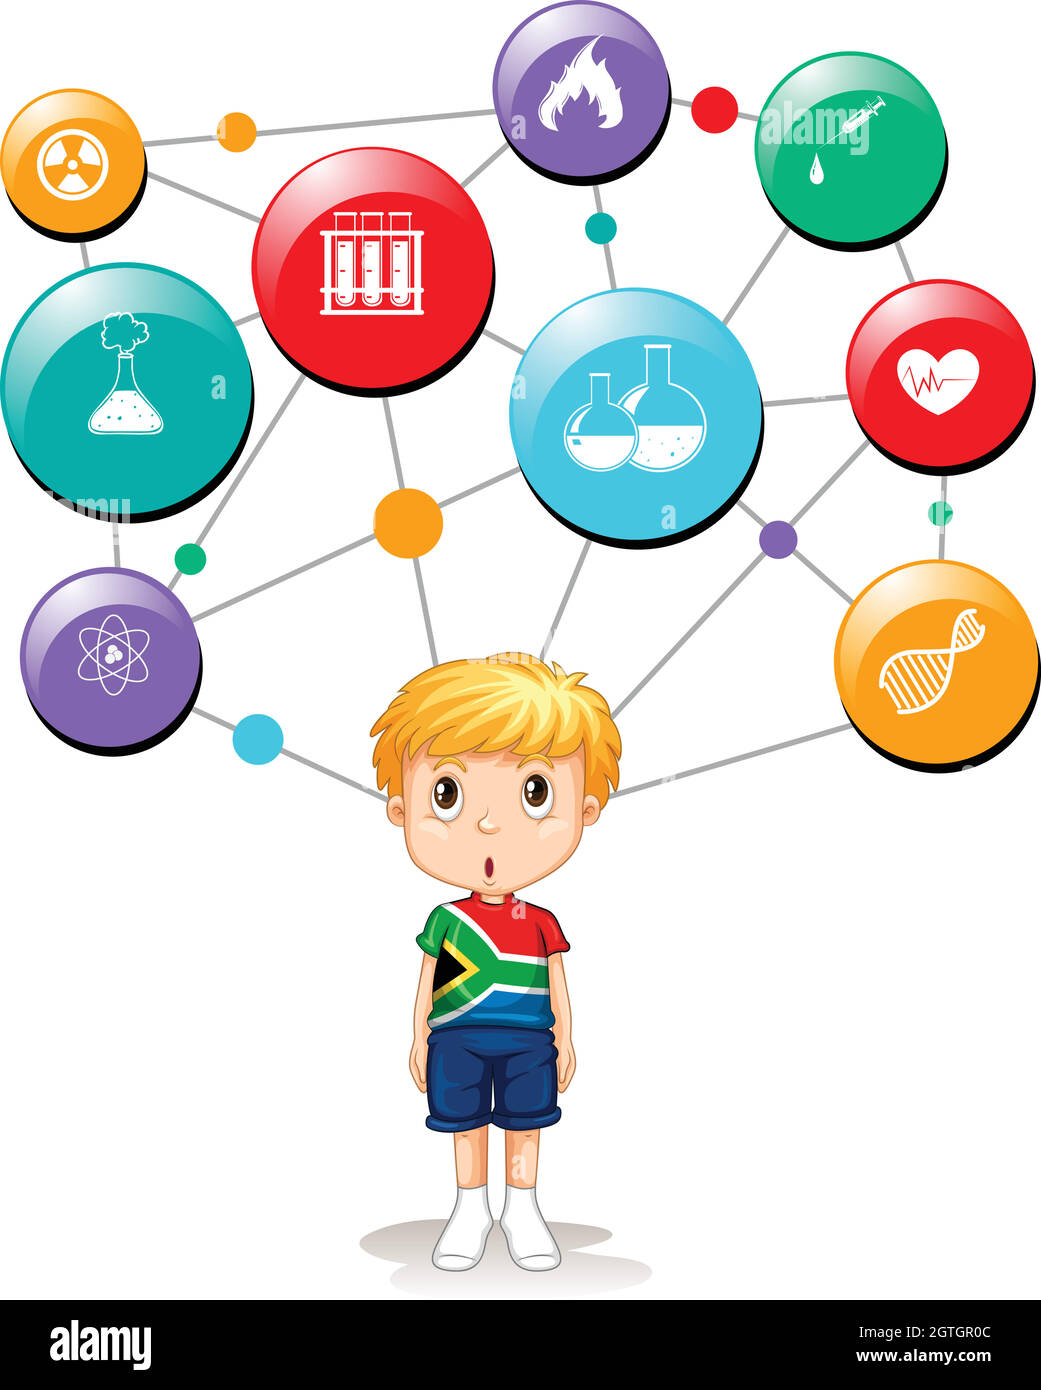 South African boy with science symbols Stock Vector